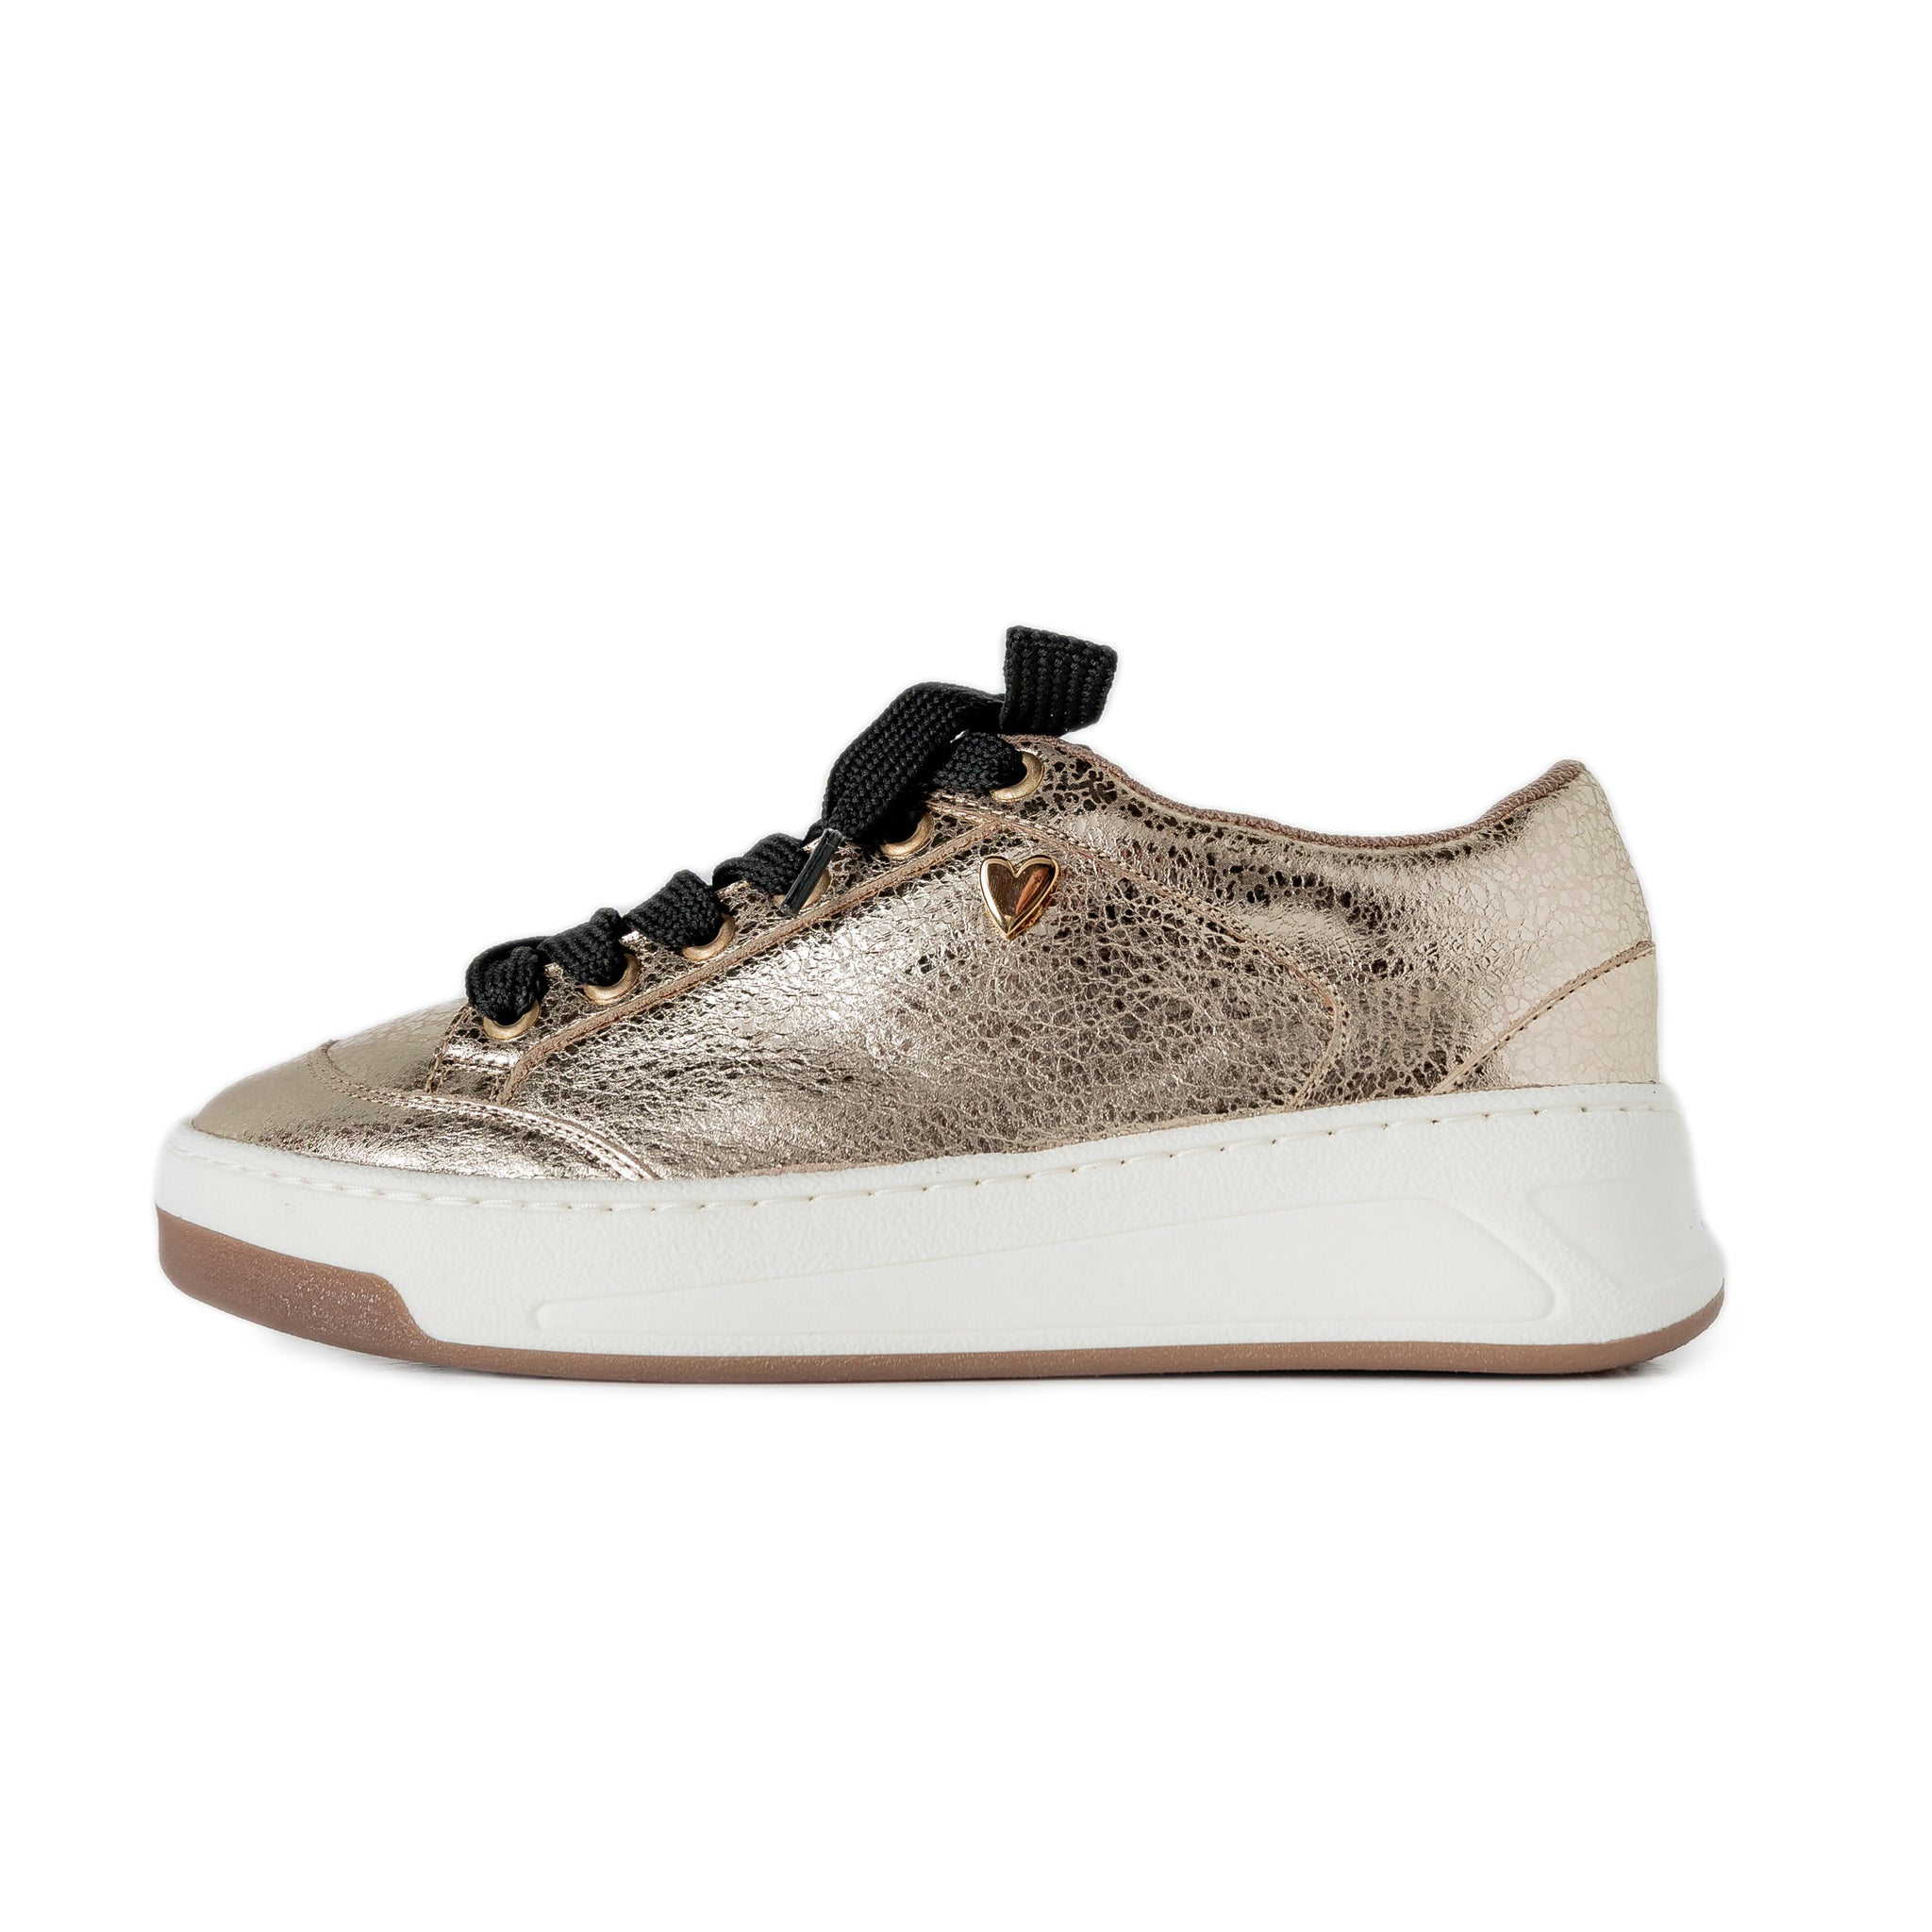 Krista Gold Sneakers by Nataly Mendez Genuine leather upper material Genuine leather insole lining Rubber platform lining American sizes Flexible rubber outsole Handcrafted 1.5 inch heel height 1 inch platform